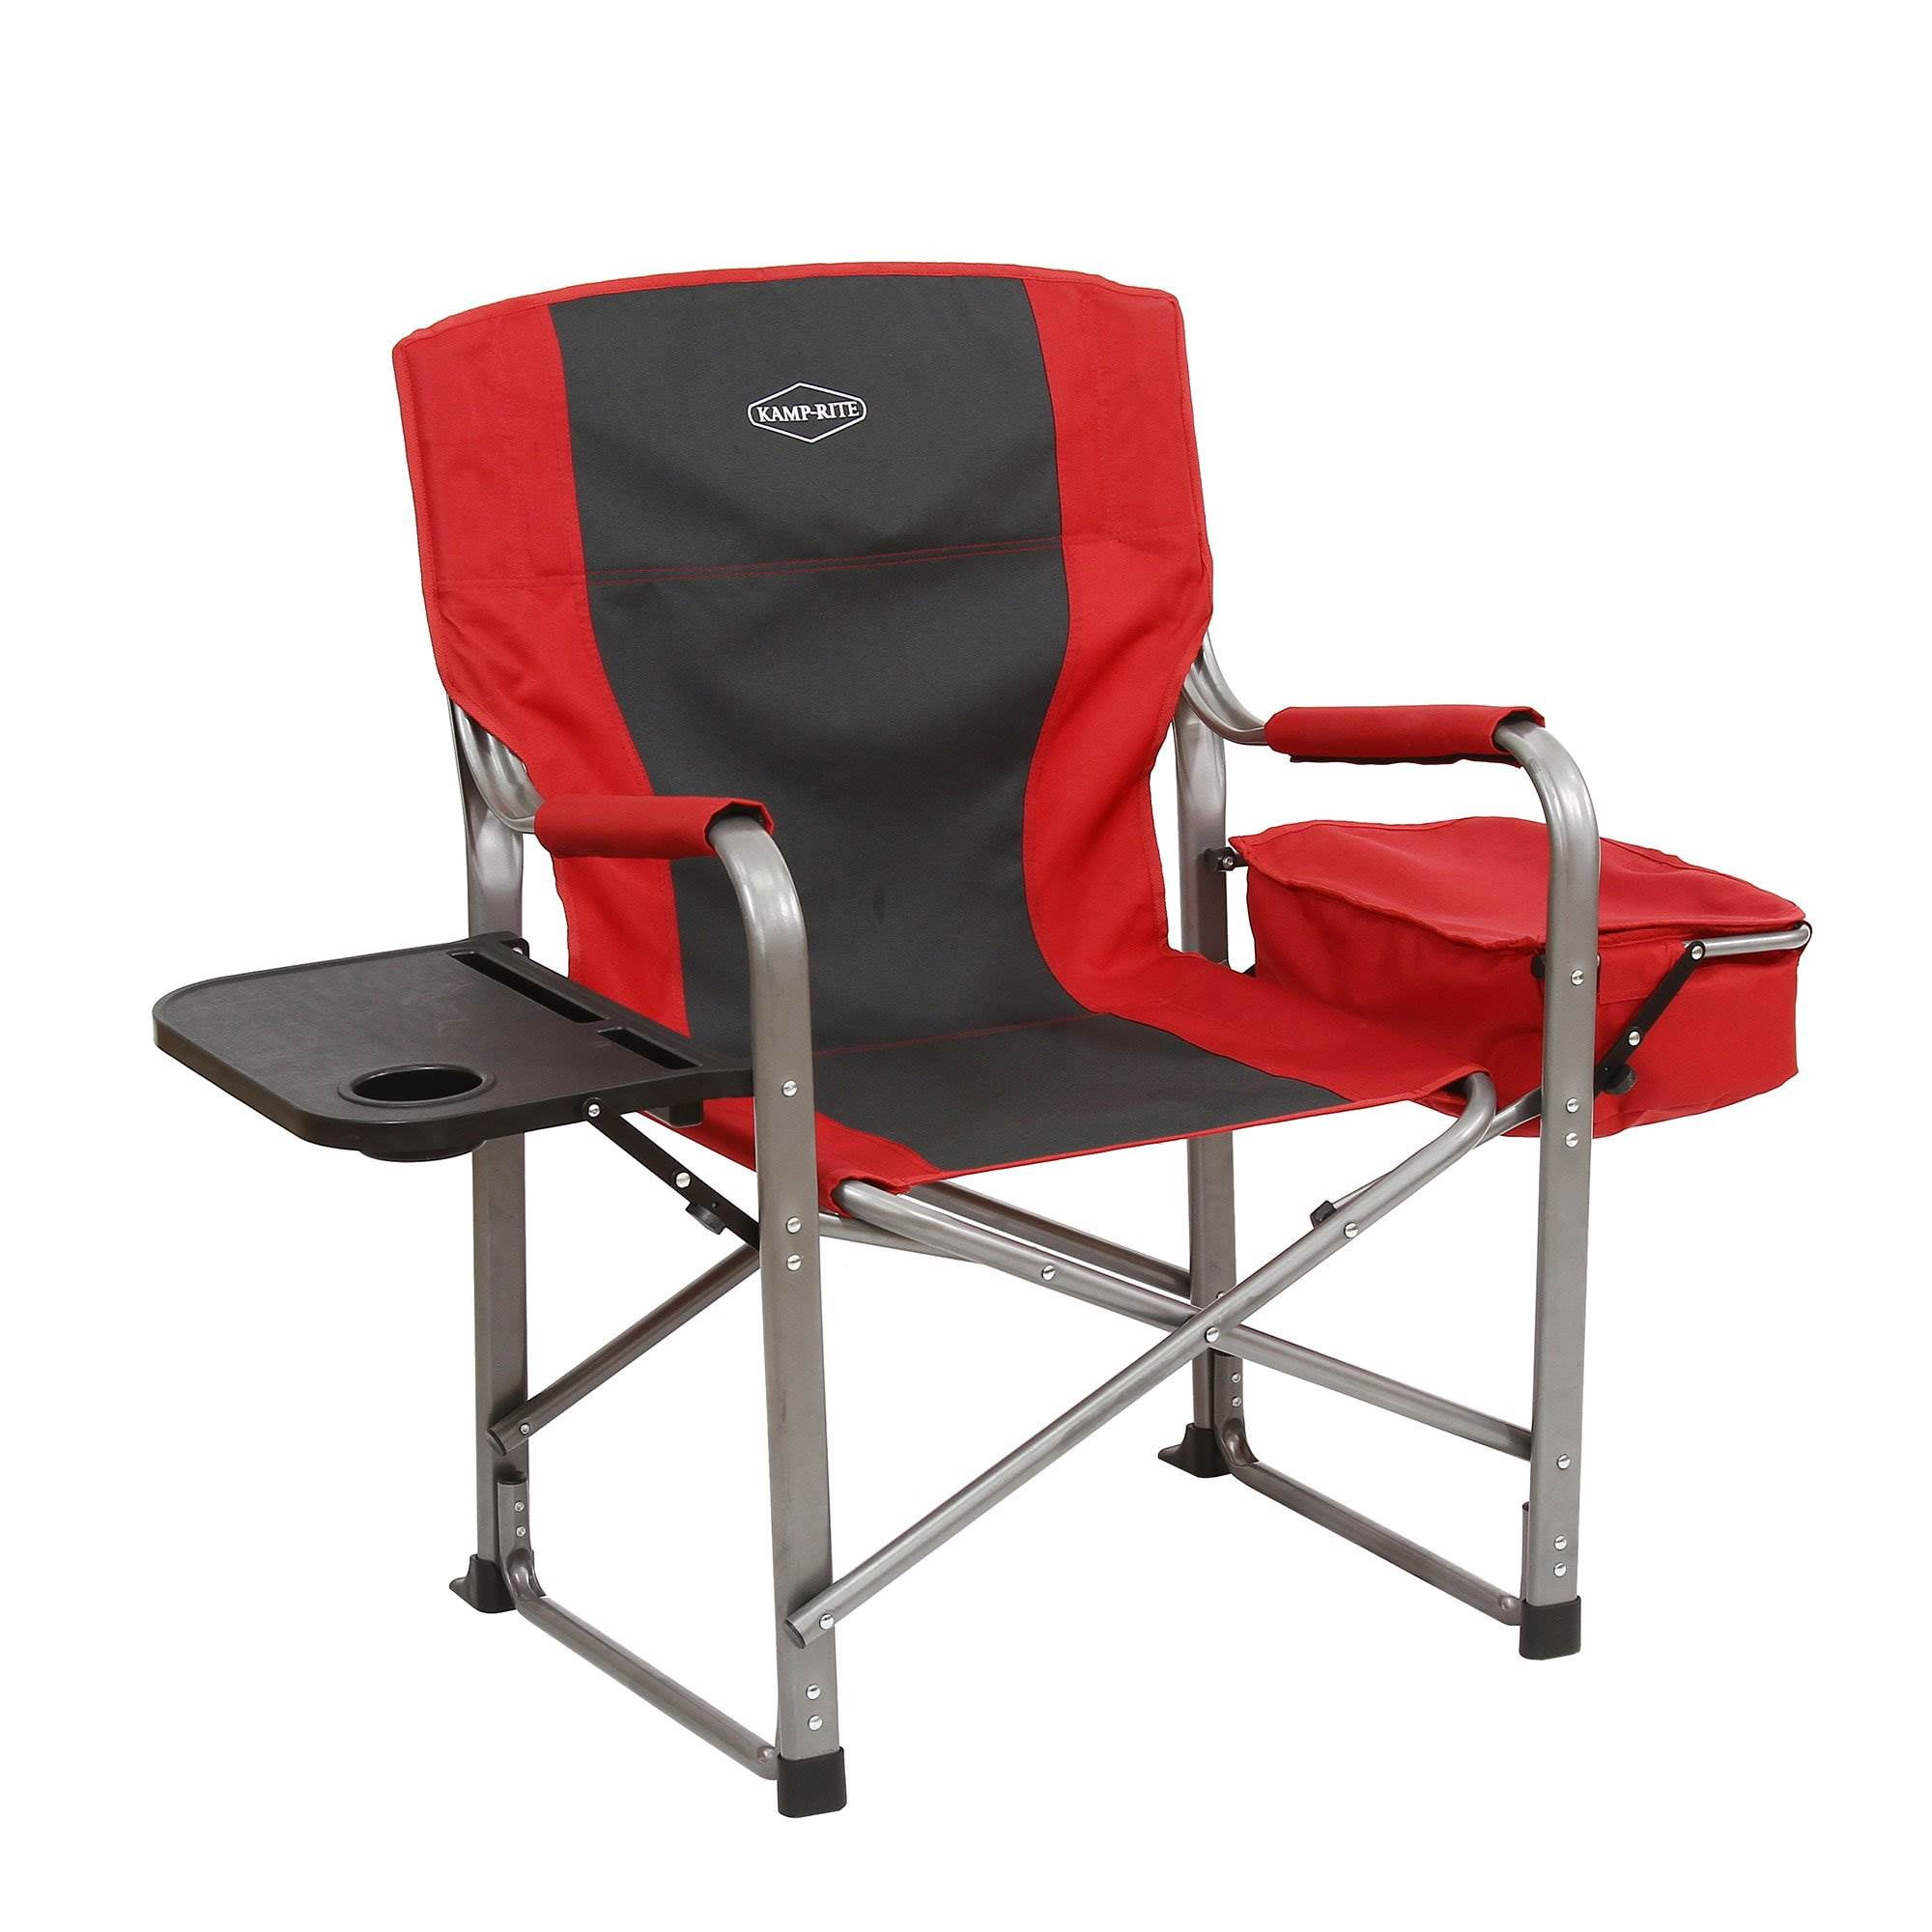 Red Kamp-Rite Outdoor Camping Folding Director's Chair w/ Side Table Open Box